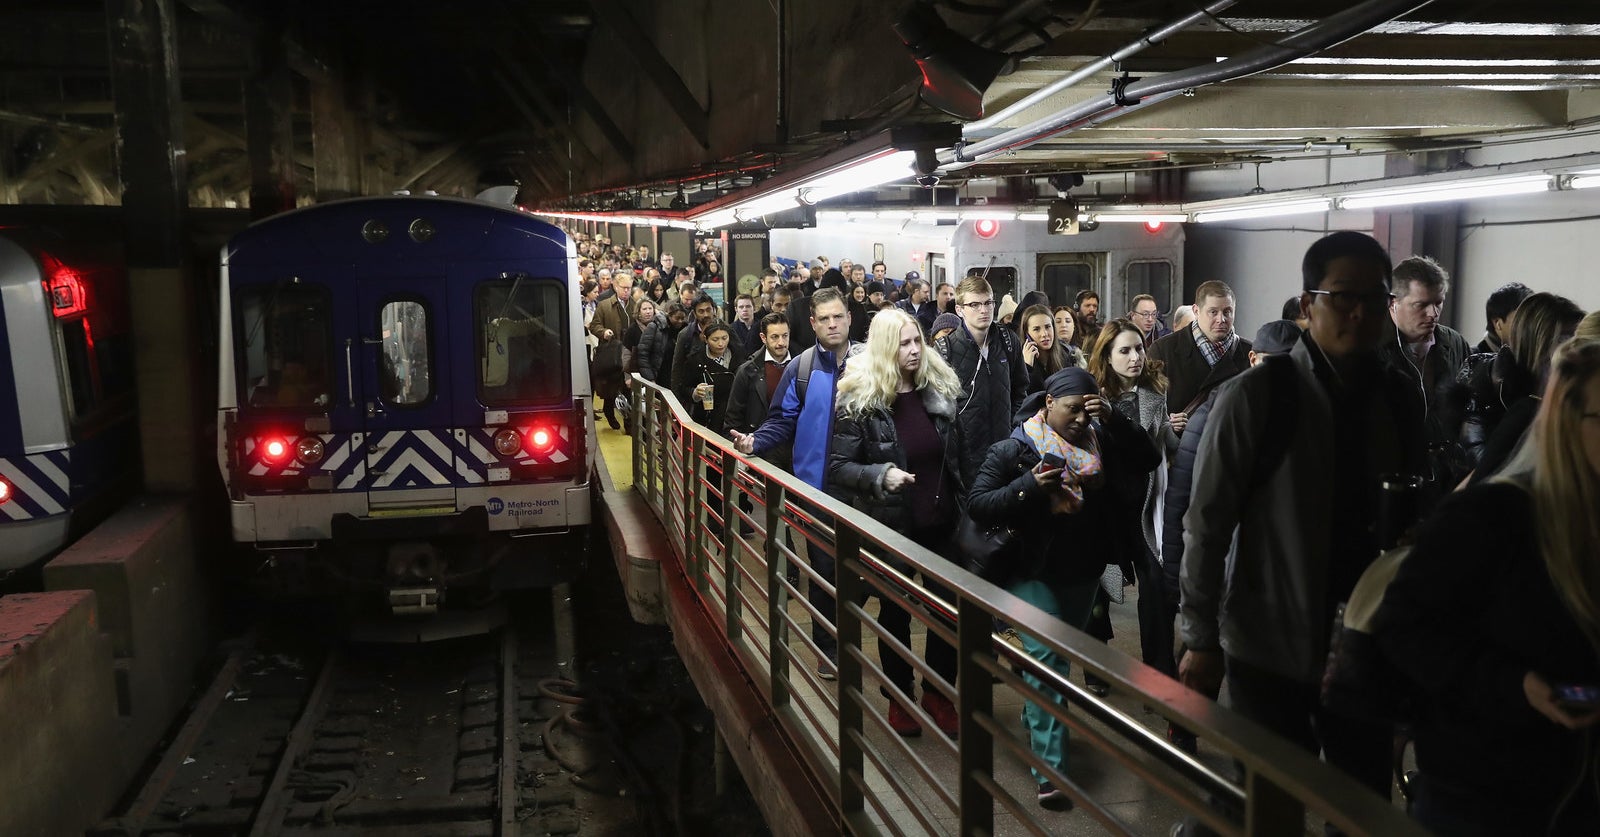 A Man Was Dragged To His Death By A Subway Train At NYC's Grand Central